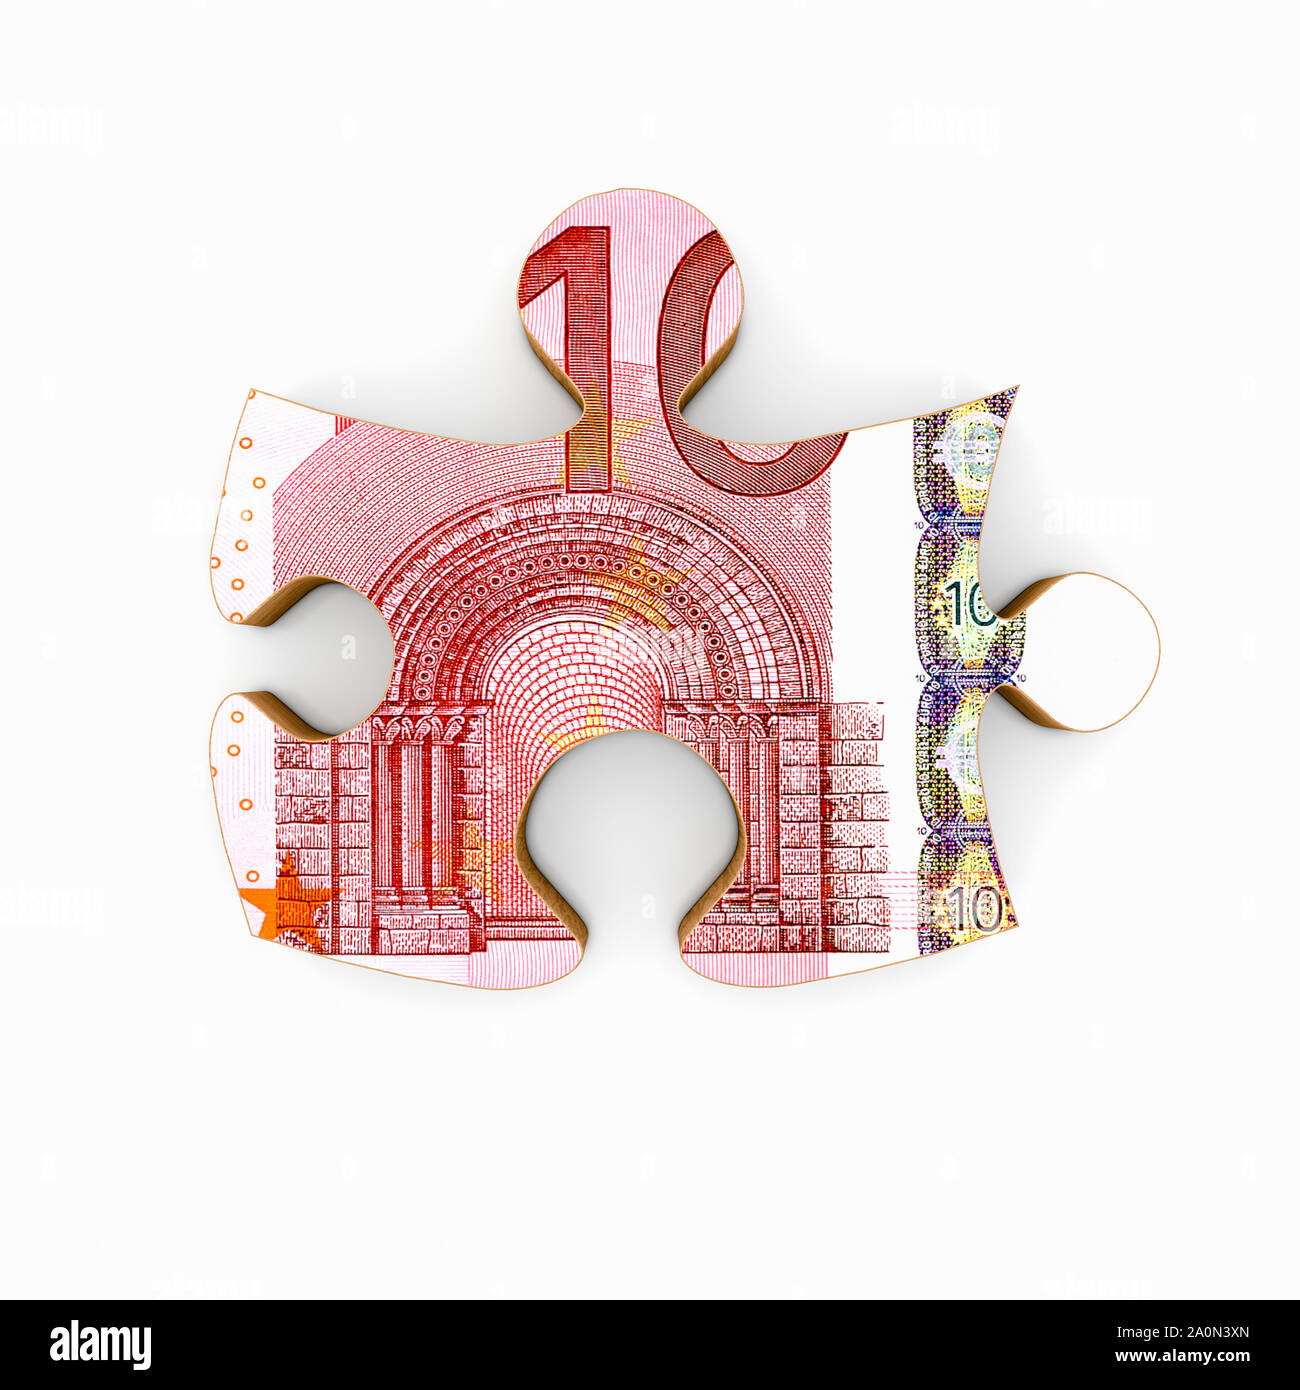 Euro currency banknote on a jigsaw puzzle piece Stock Photo